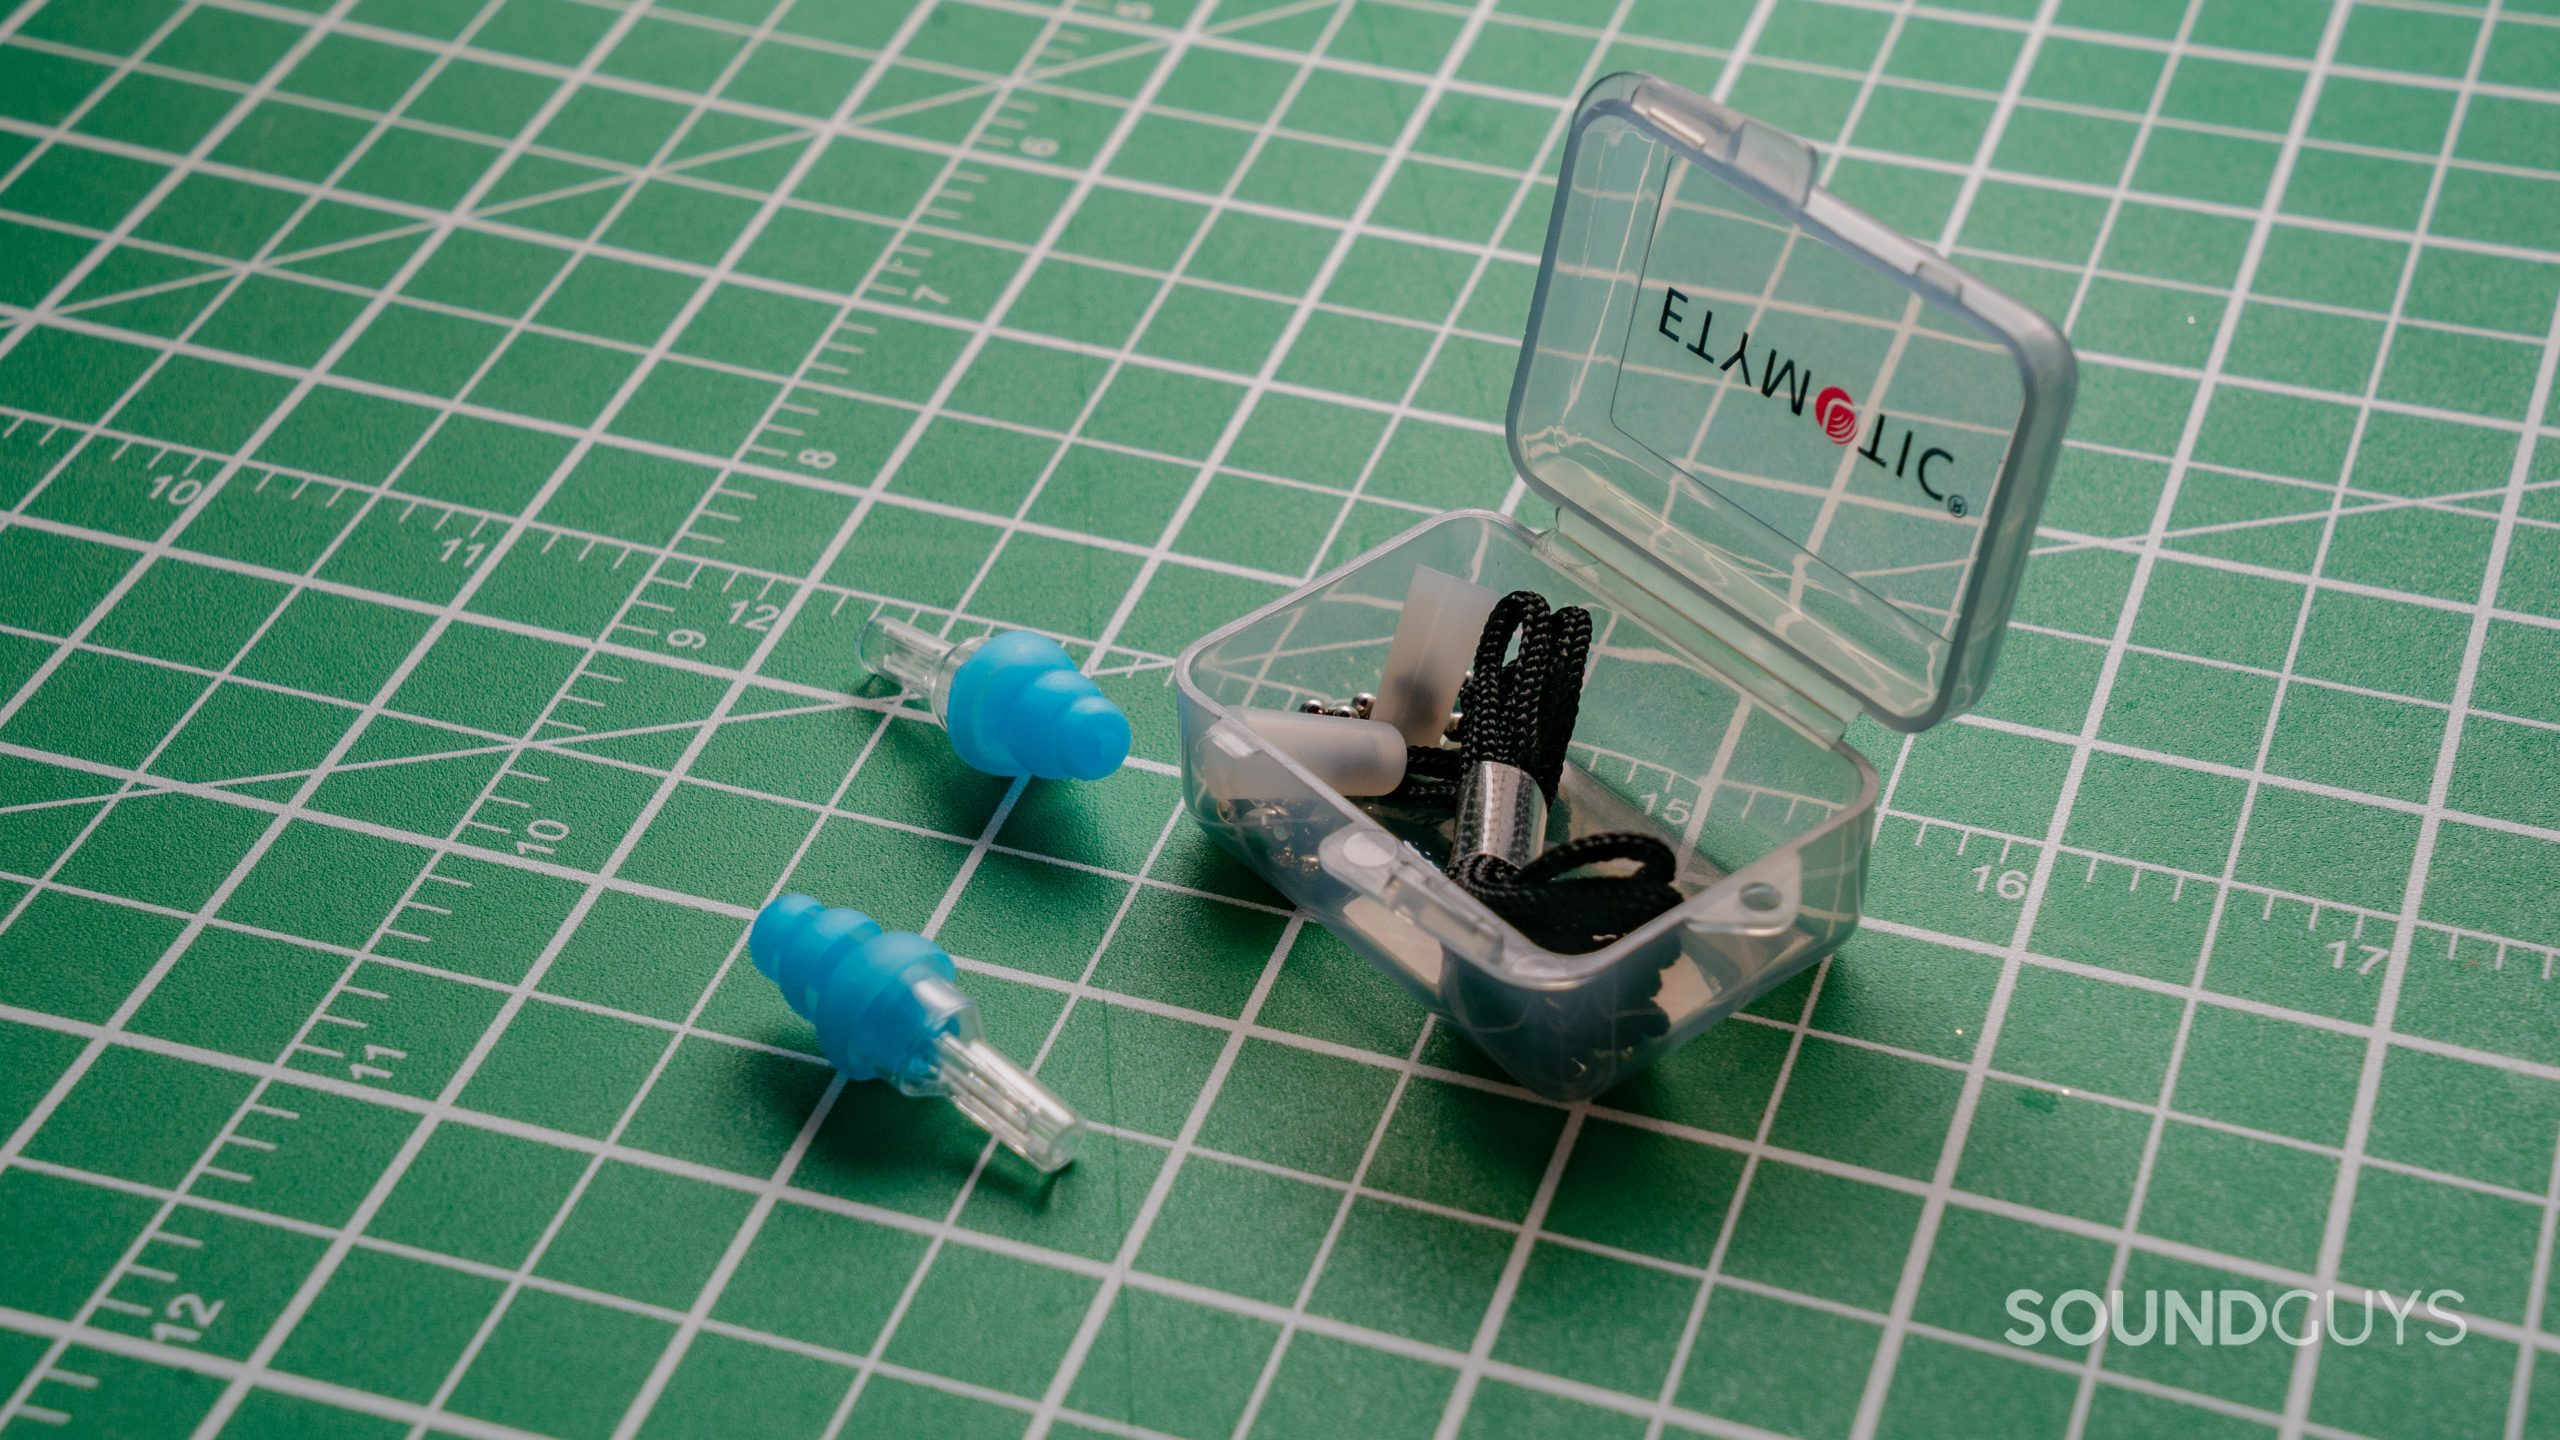 Etymotic earplugs with case against a white on green grid.